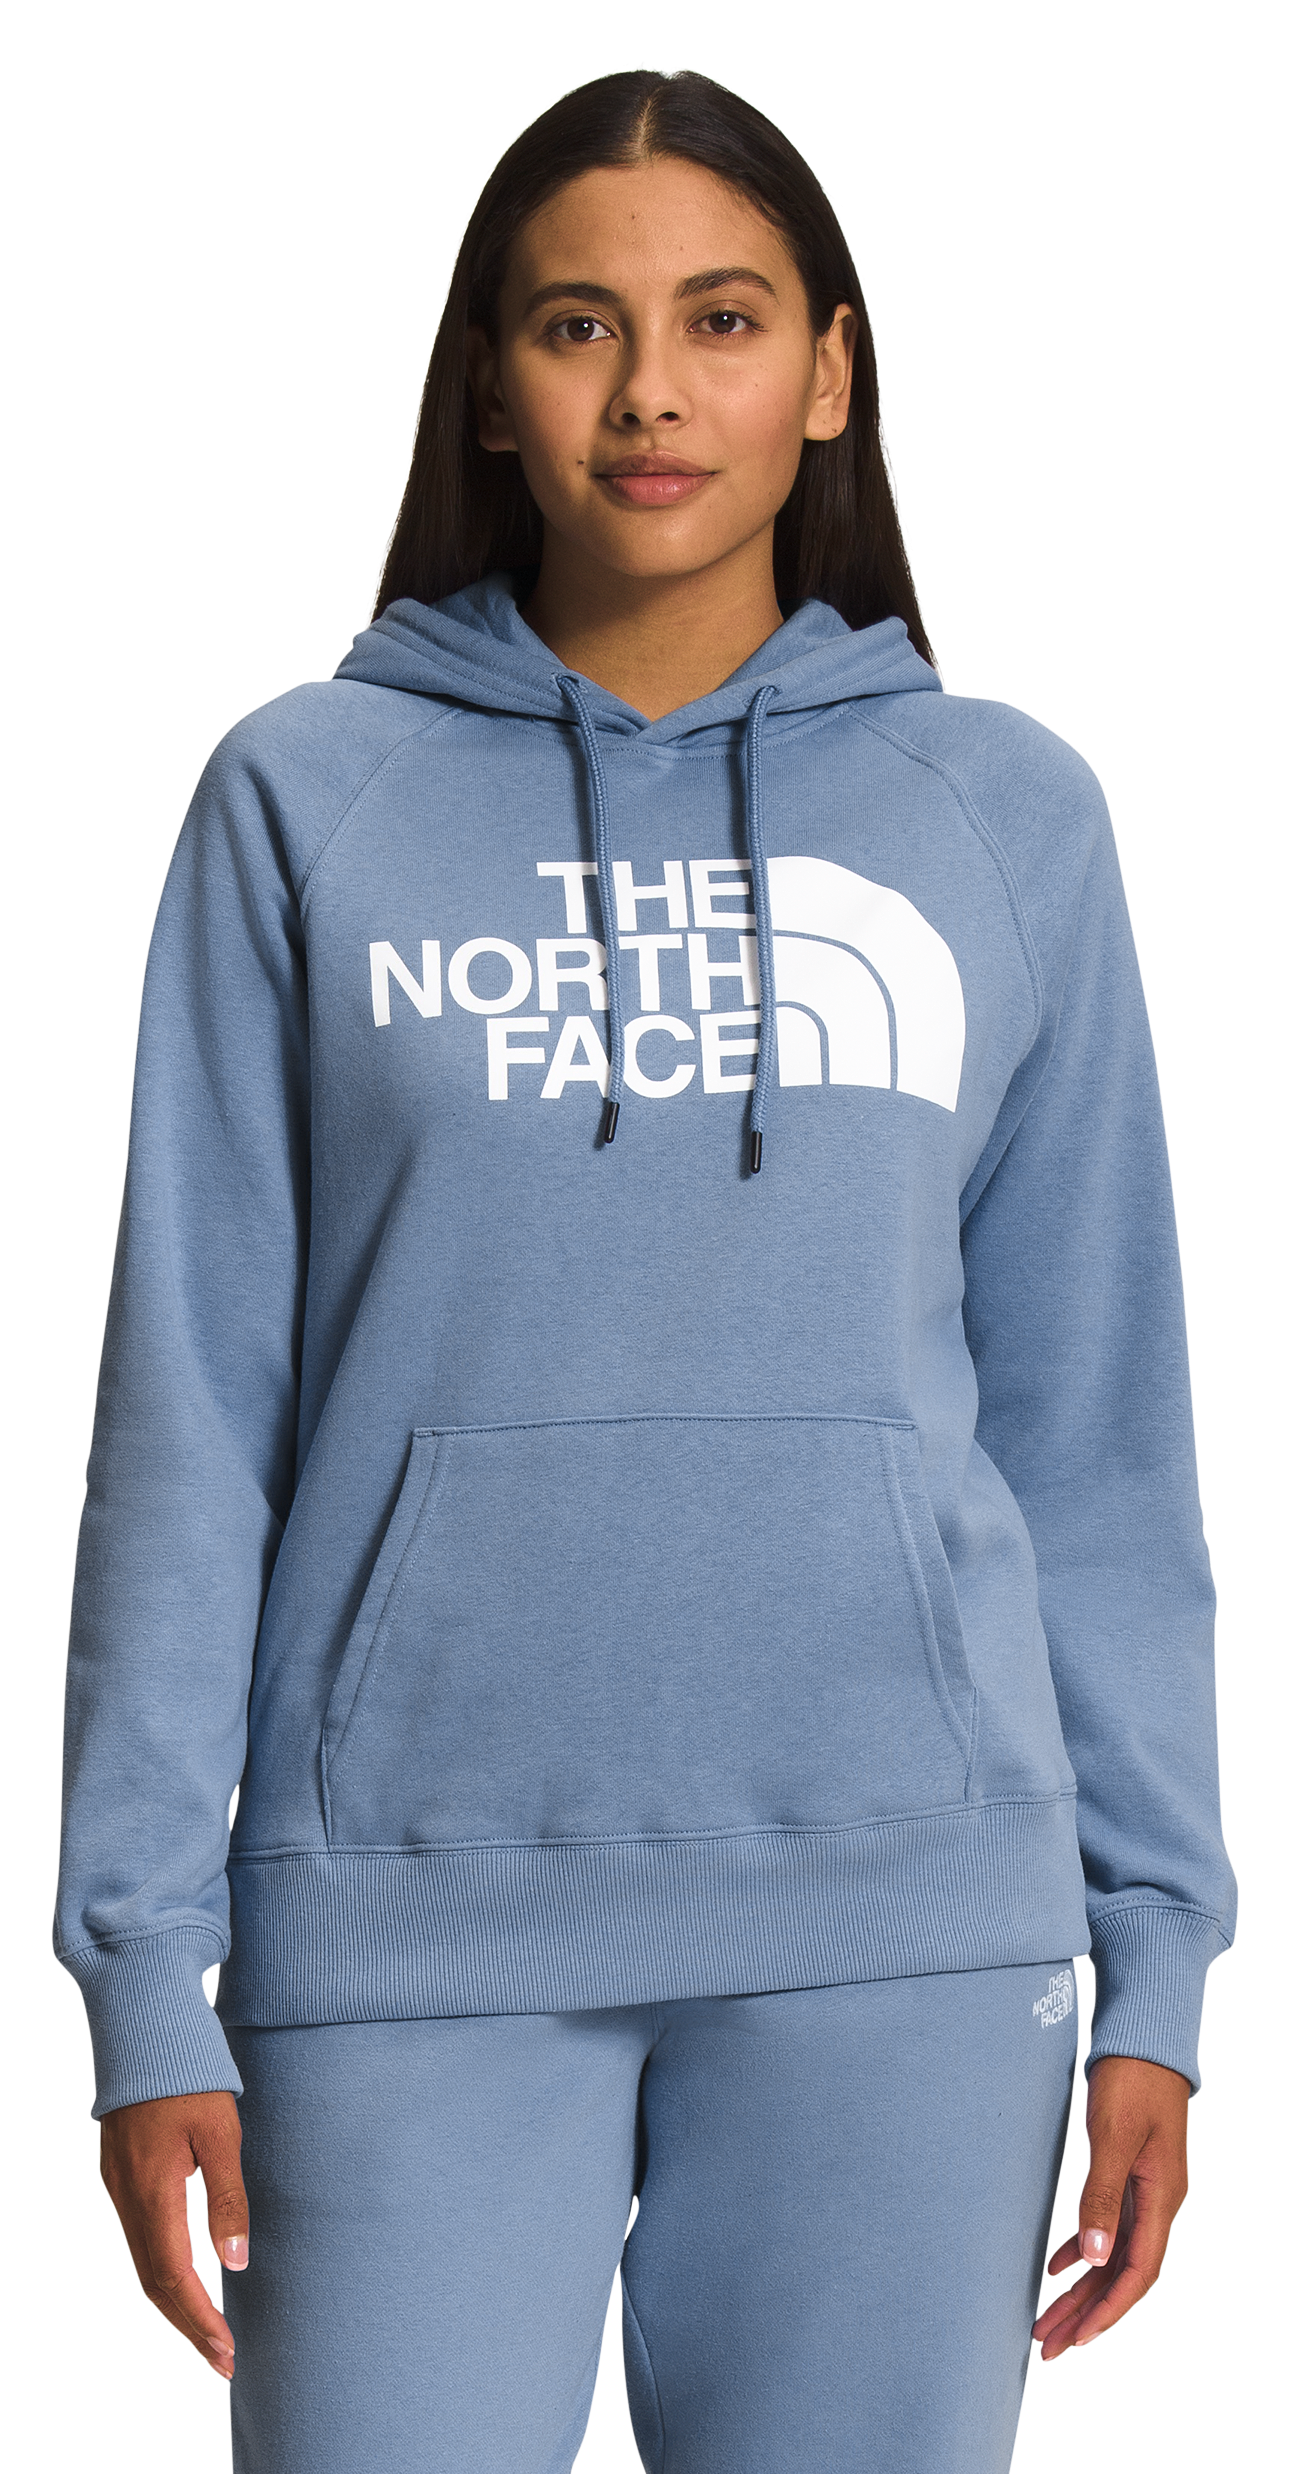 The North Face Half Dome Pullover Long-Sleeve Hoodie for Ladies - Folk Blue/TNF White - XXL